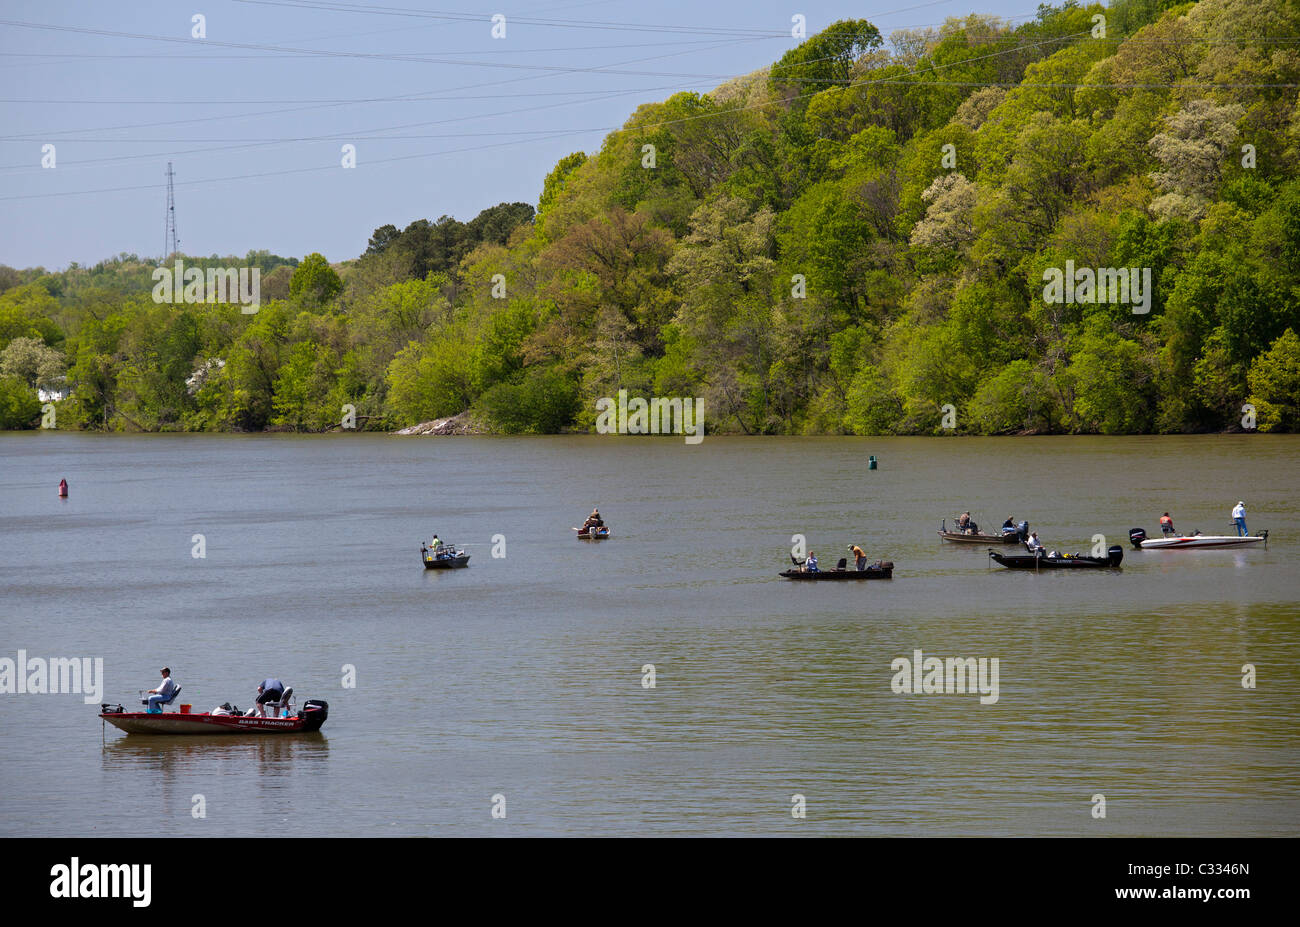 Lenoir City, Tennessee - Fishermen on the Tennessee River below the Tennessee Valley Authority's Fort Loudoun Dam. Stock Photo